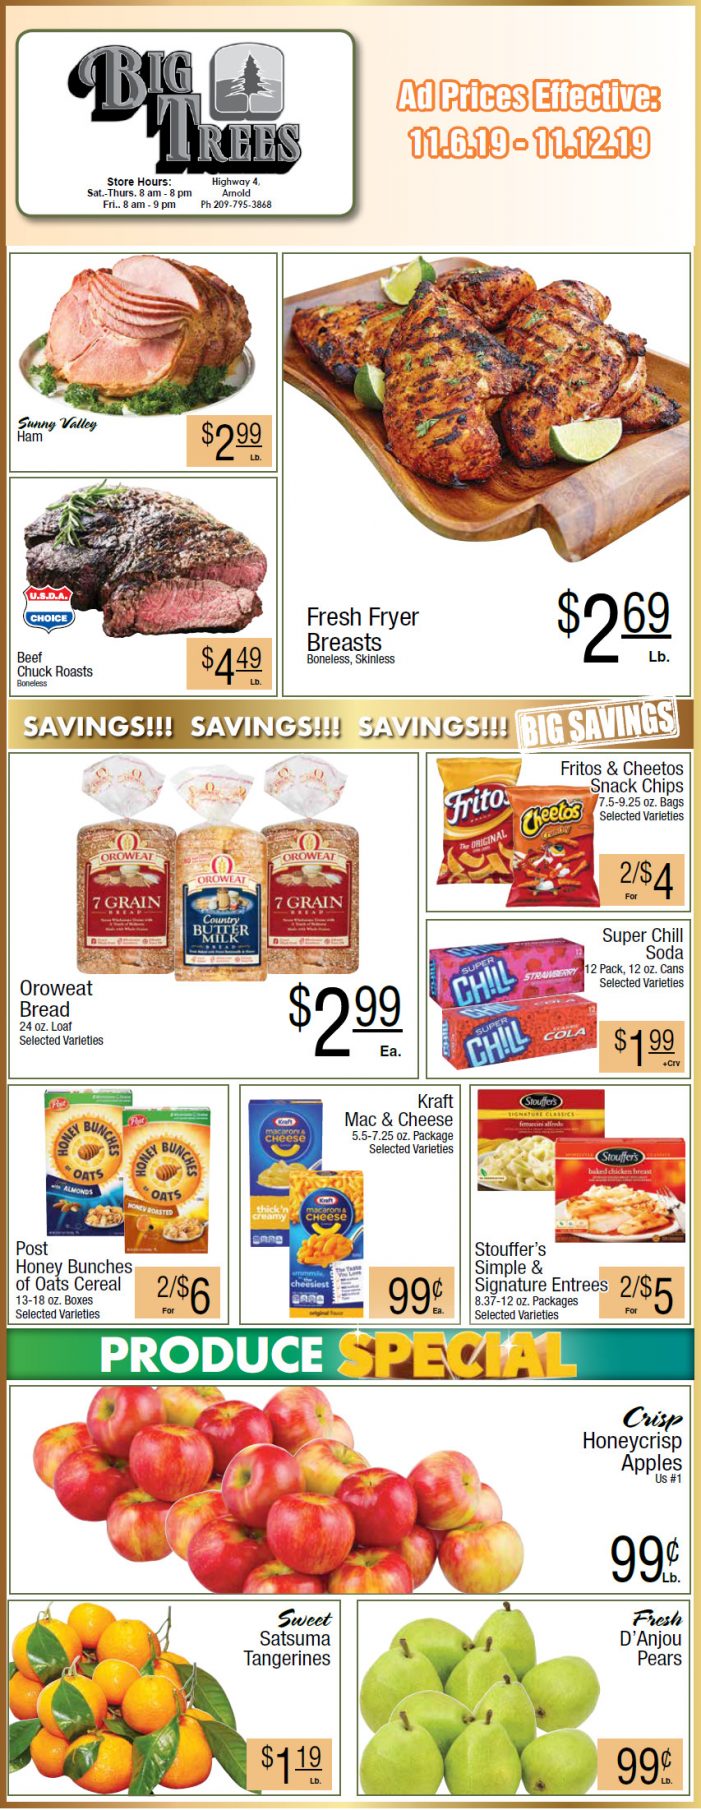 Big Trees Market’s Weekly Ad & Grocery Specials Through November 12th!  Shop Local & Save!